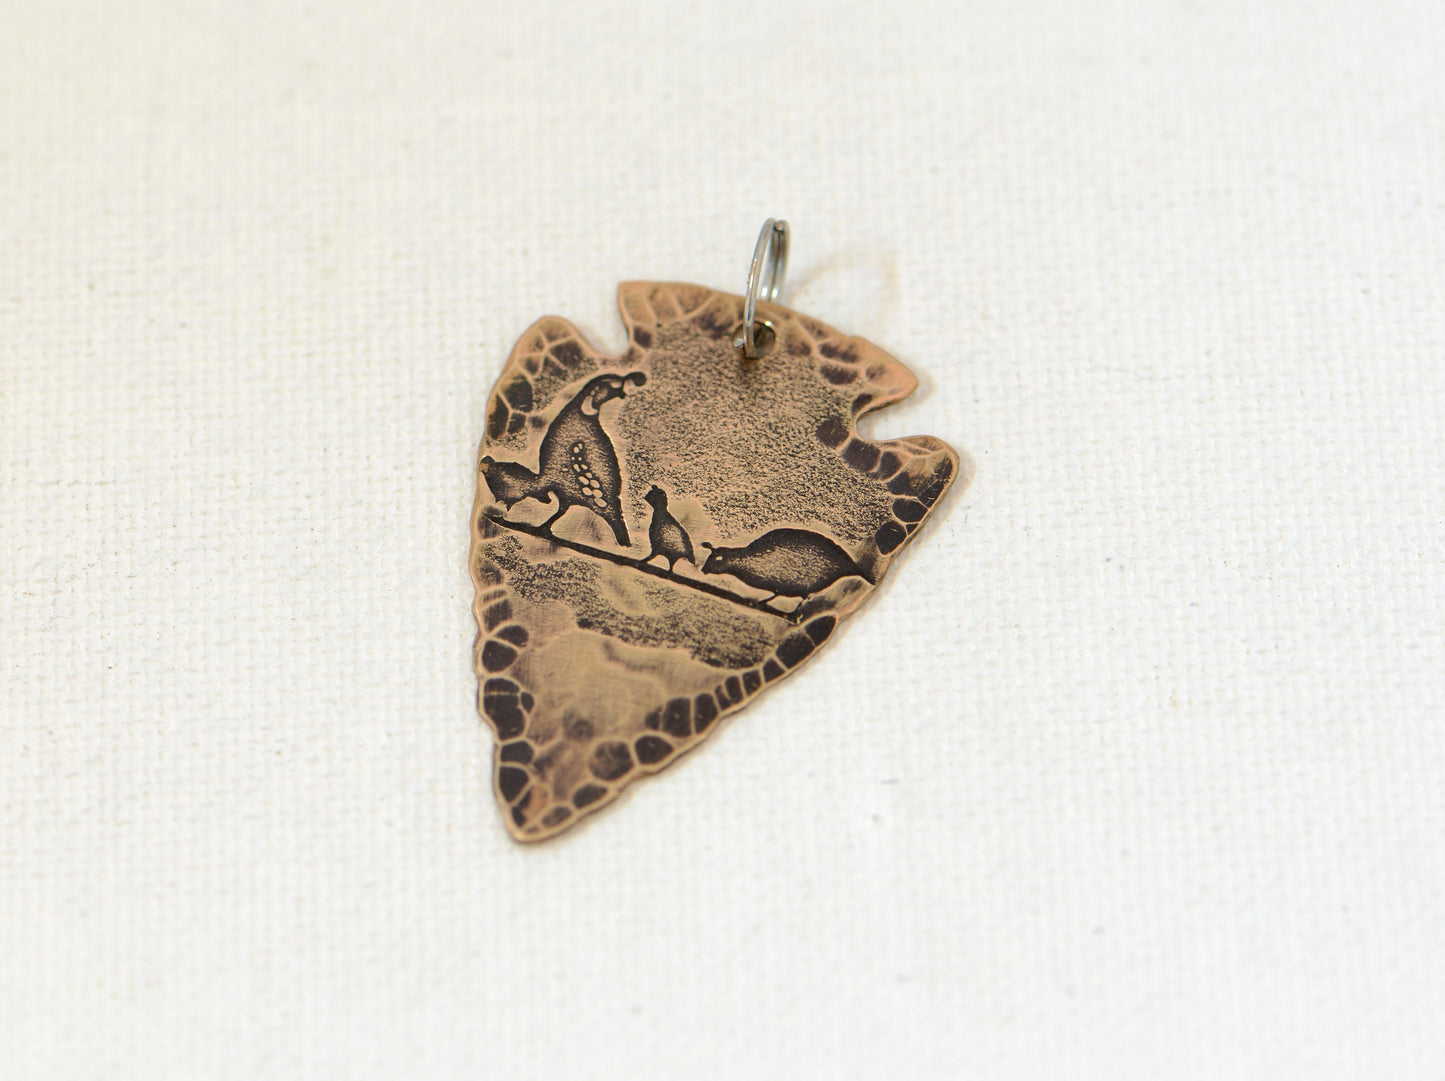 Pheasants on Copper Arrowhead Necklace with Rustic Hammered Patterning